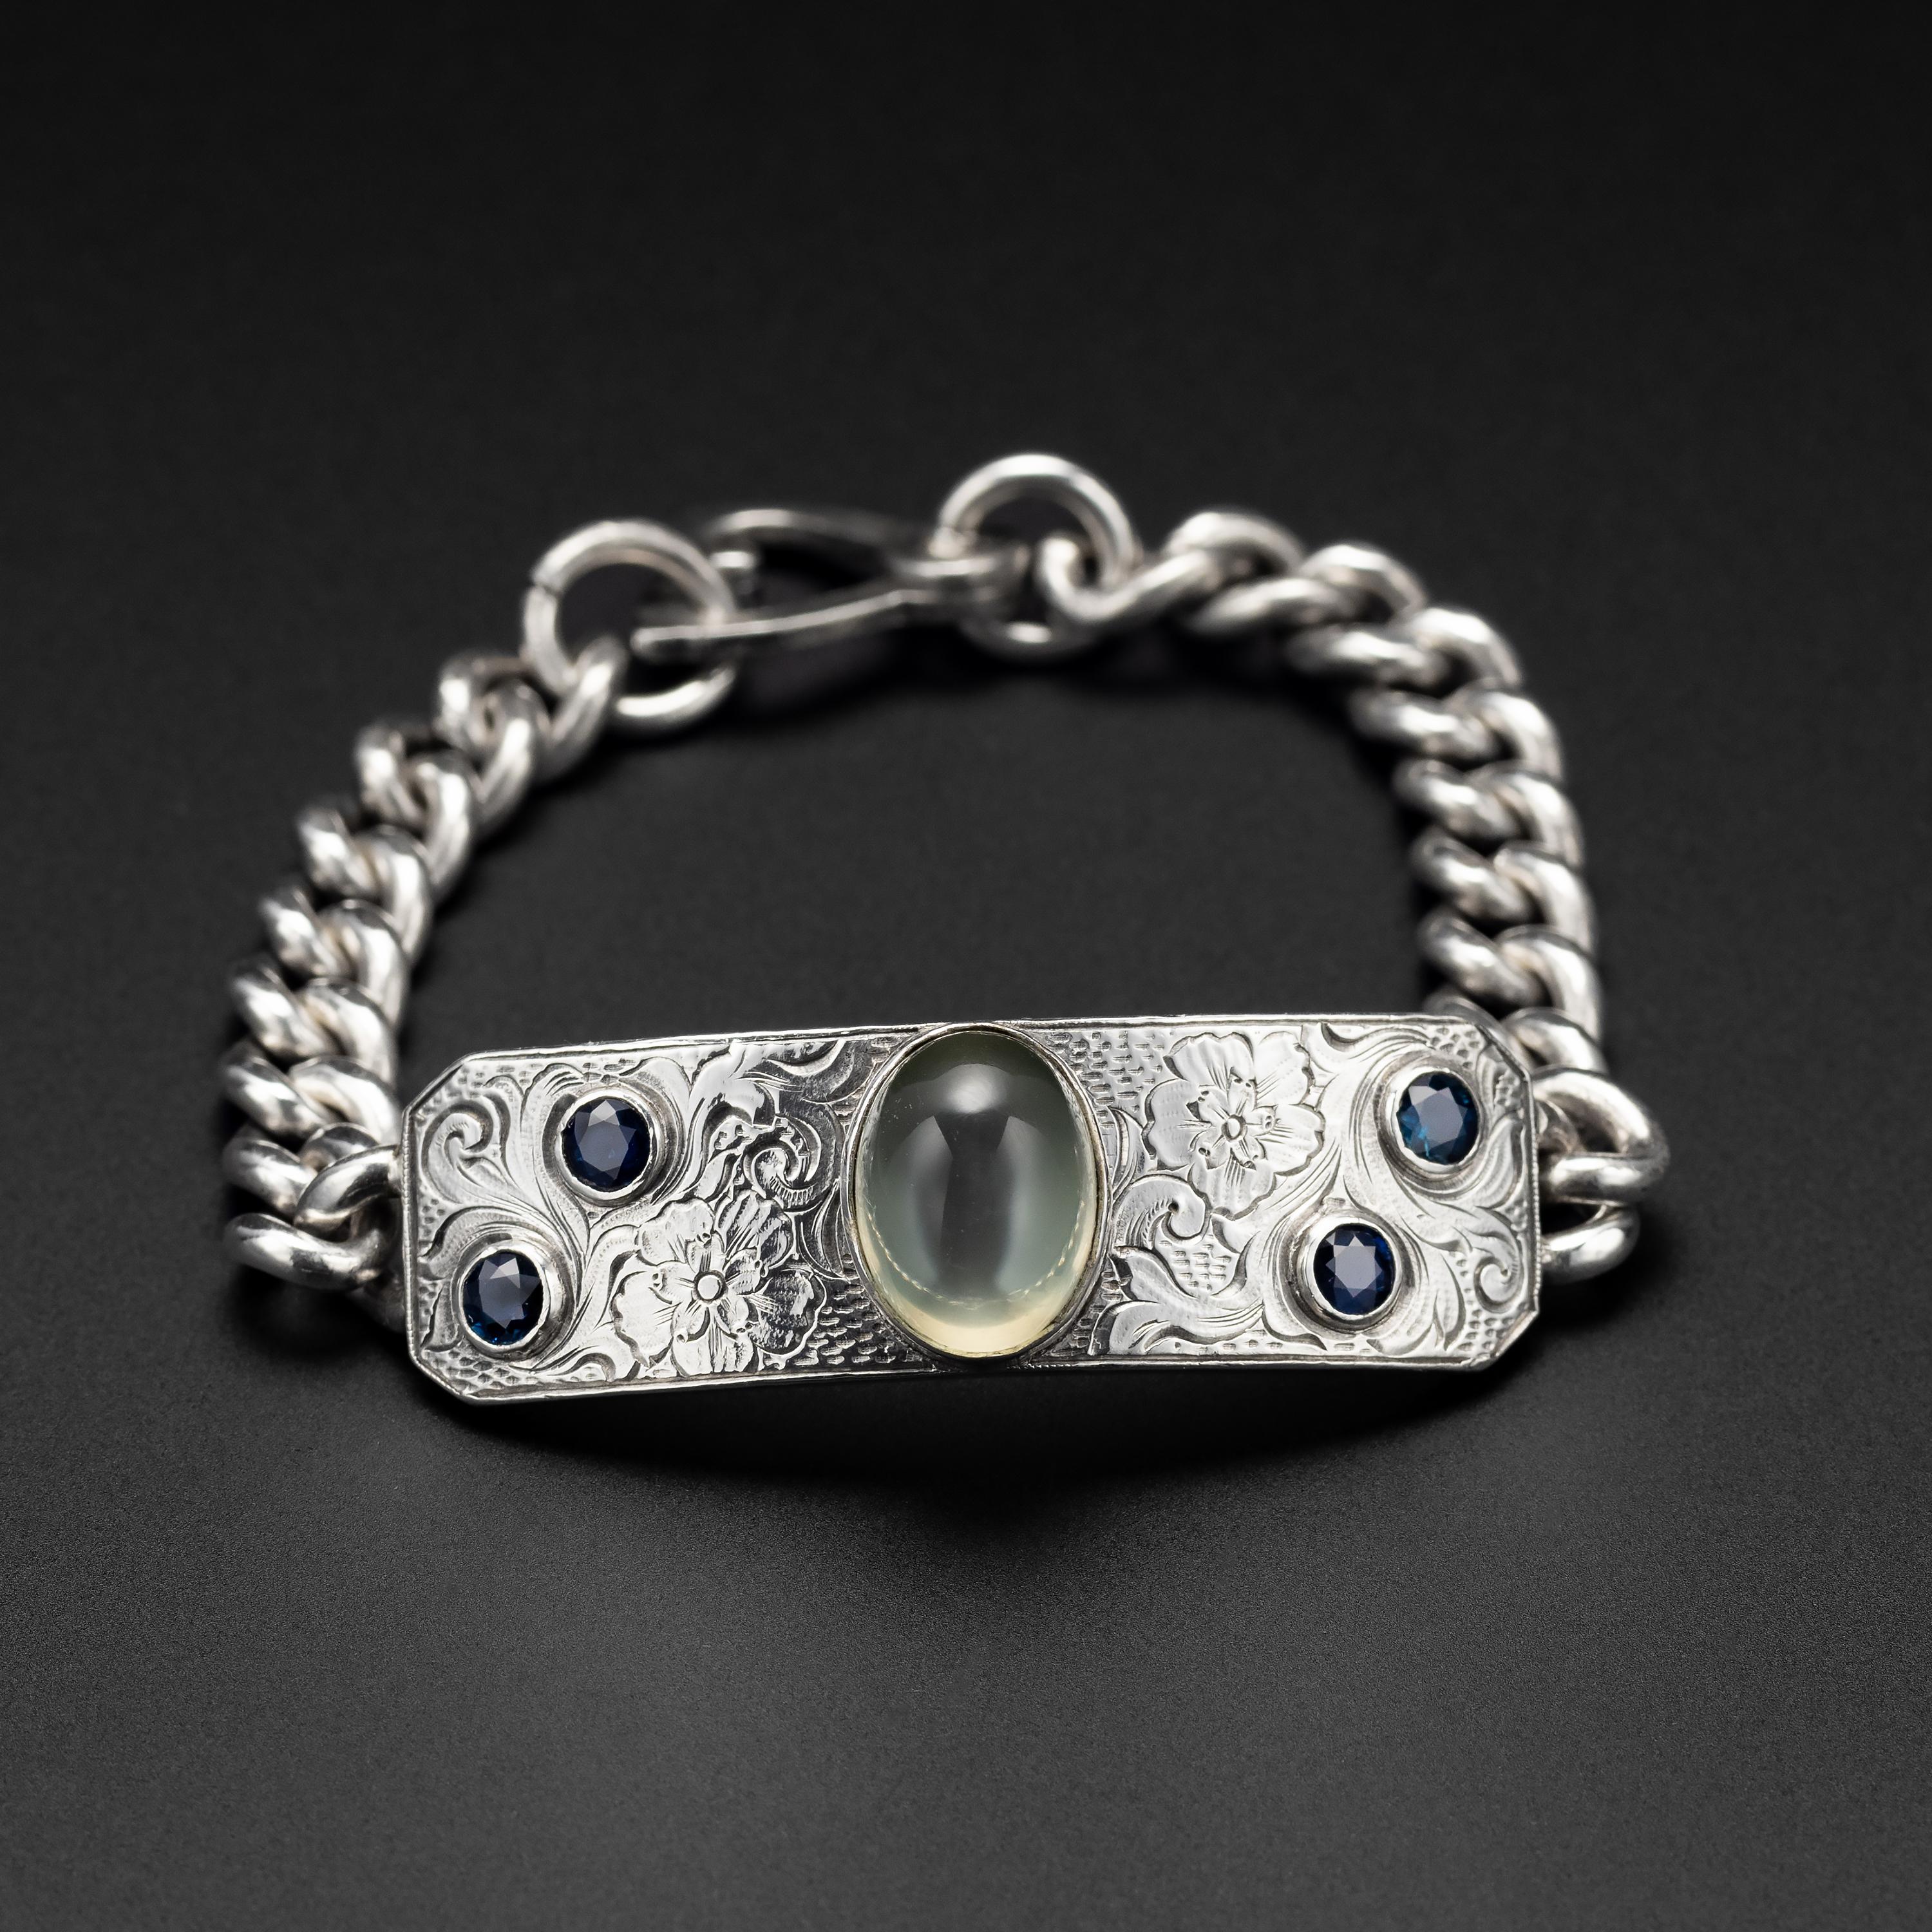 What a beautiful and unusual Edwardian-era (circa 1910) heavy silver bracelet. The thick (2.8mm) curved bar of silver is engraved in a floral motif. In the center is a large and luminous natural moonstone gem. The moonstone measures 14.68mm x